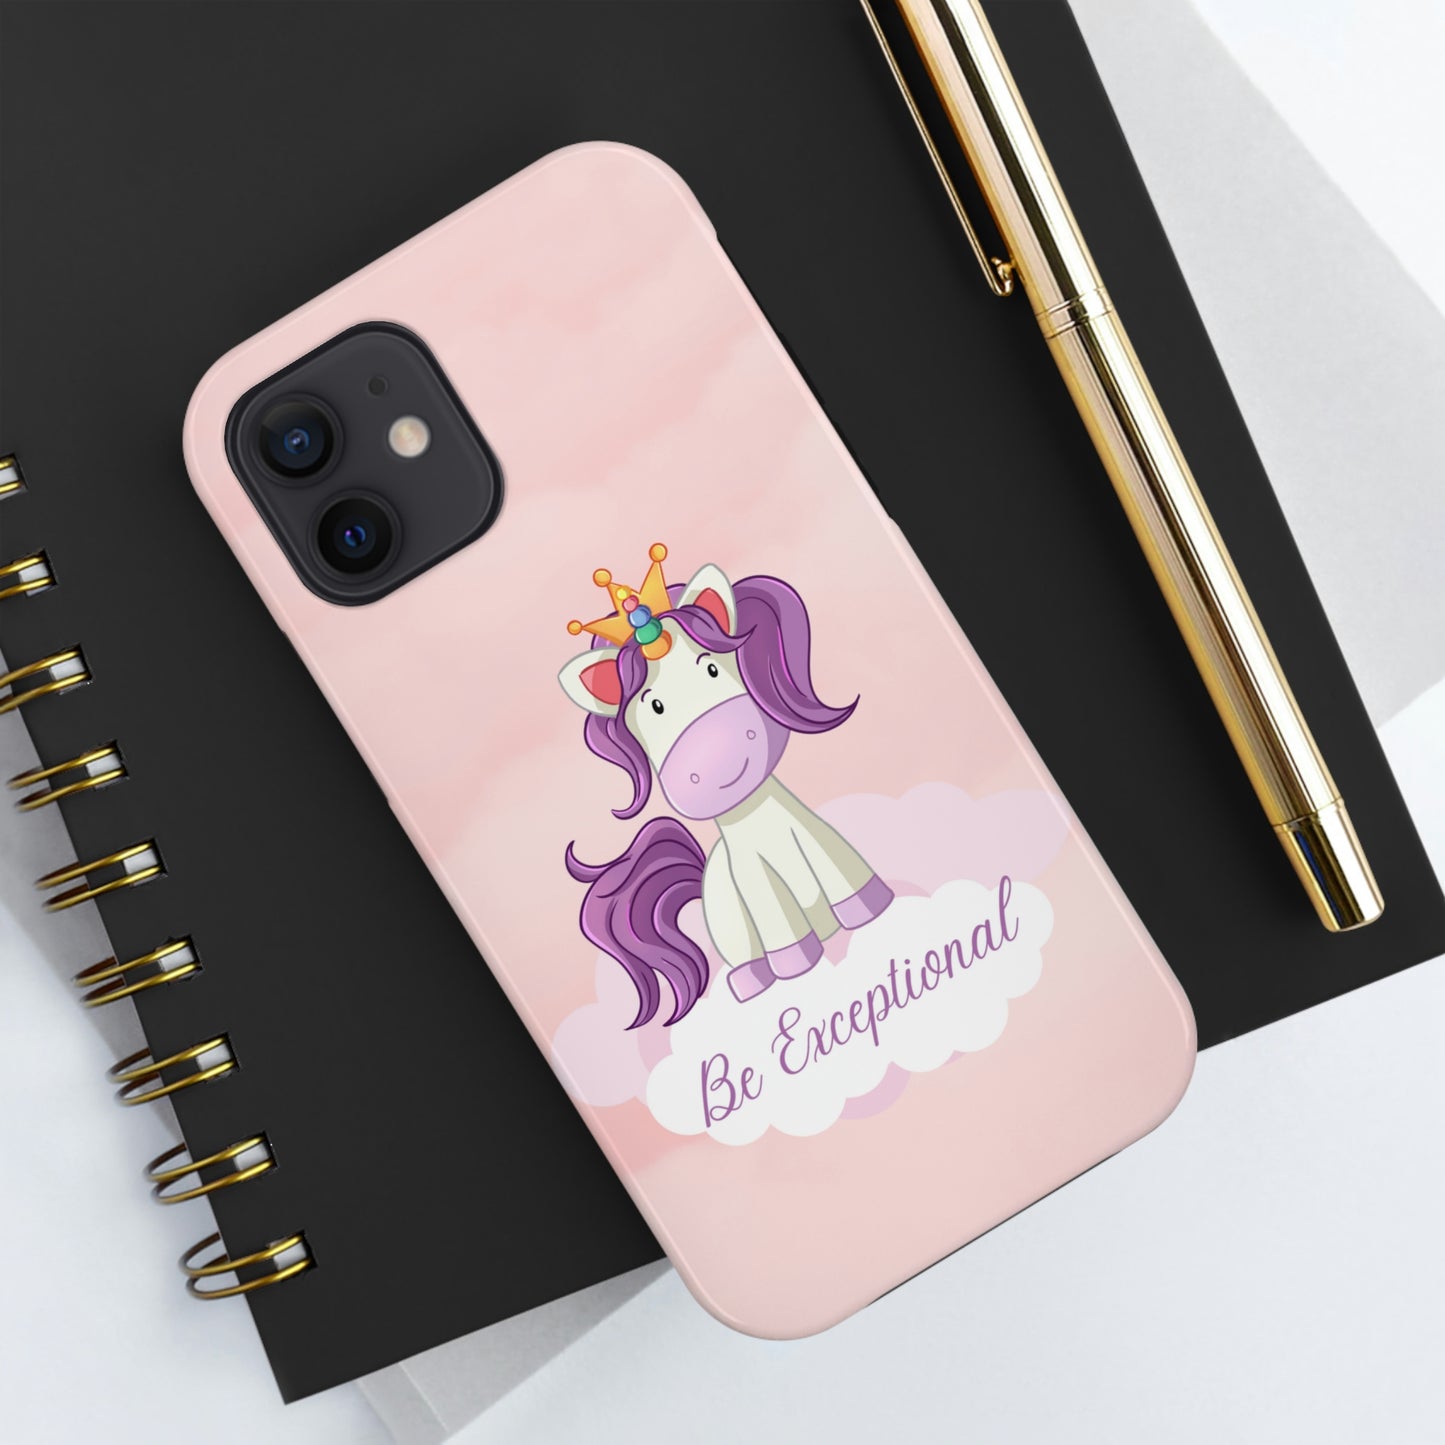 Be Exceptional - Tough Phone Cases, Case-Mate